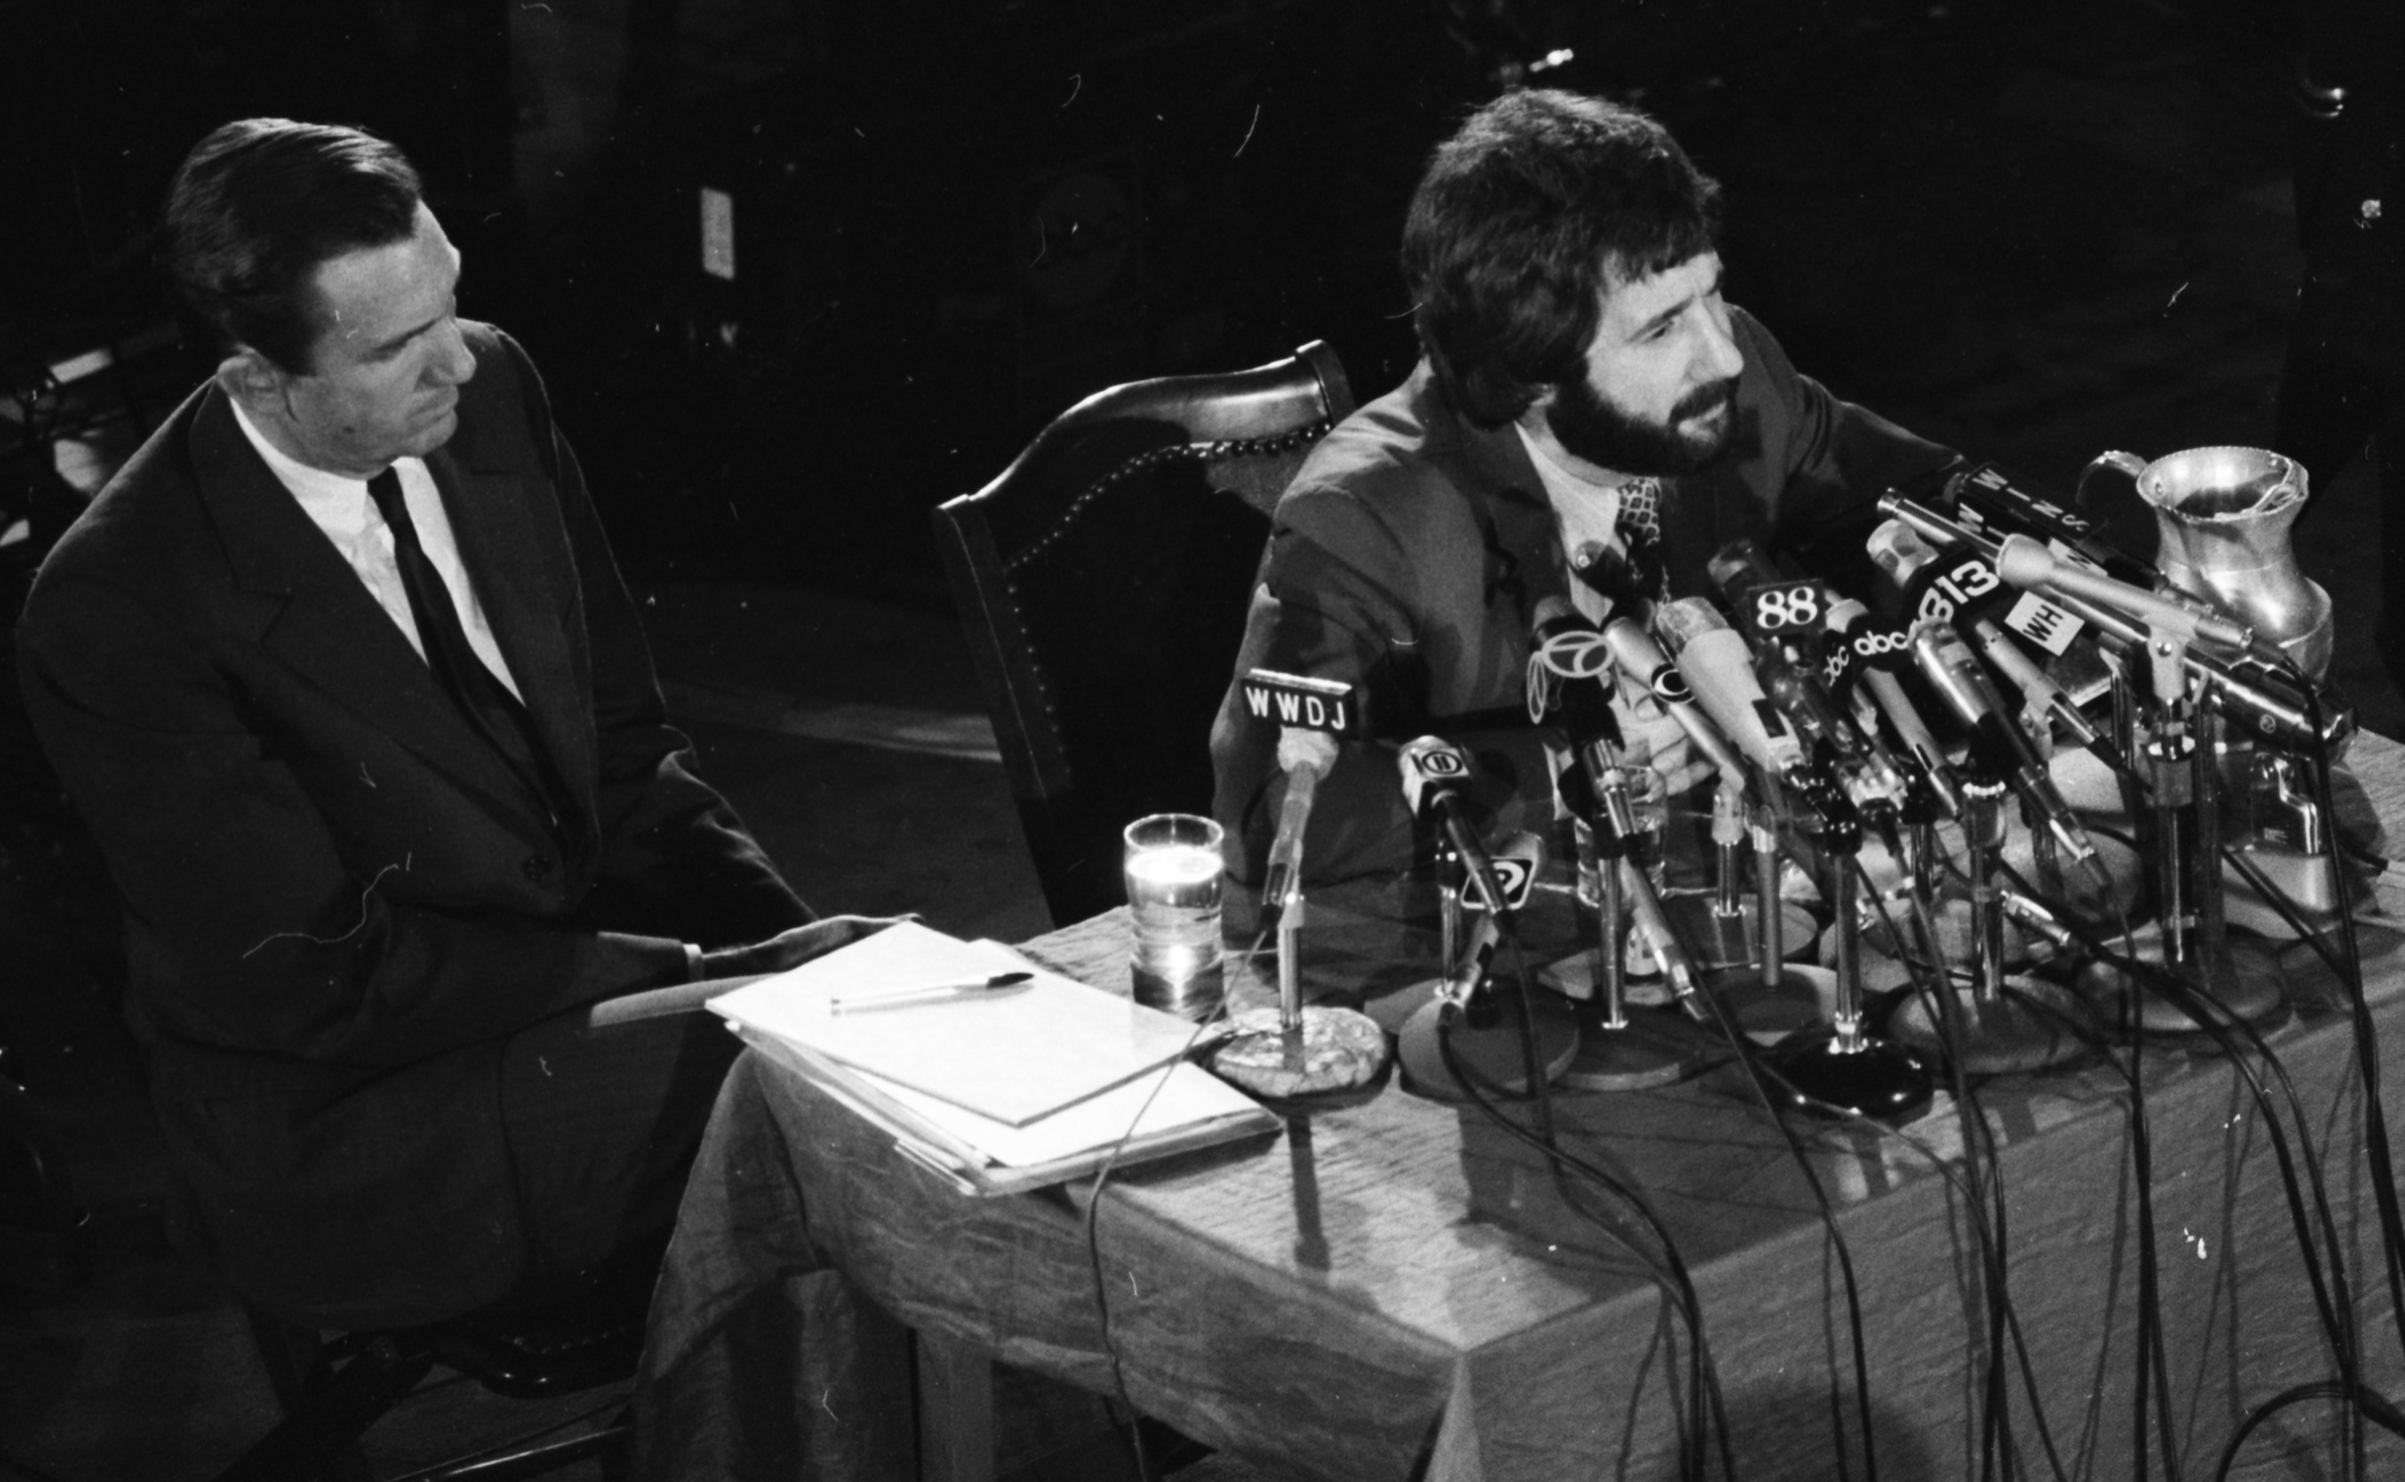 Frank Serpico testifies in 1971 (New York Daily News/Getty Images)